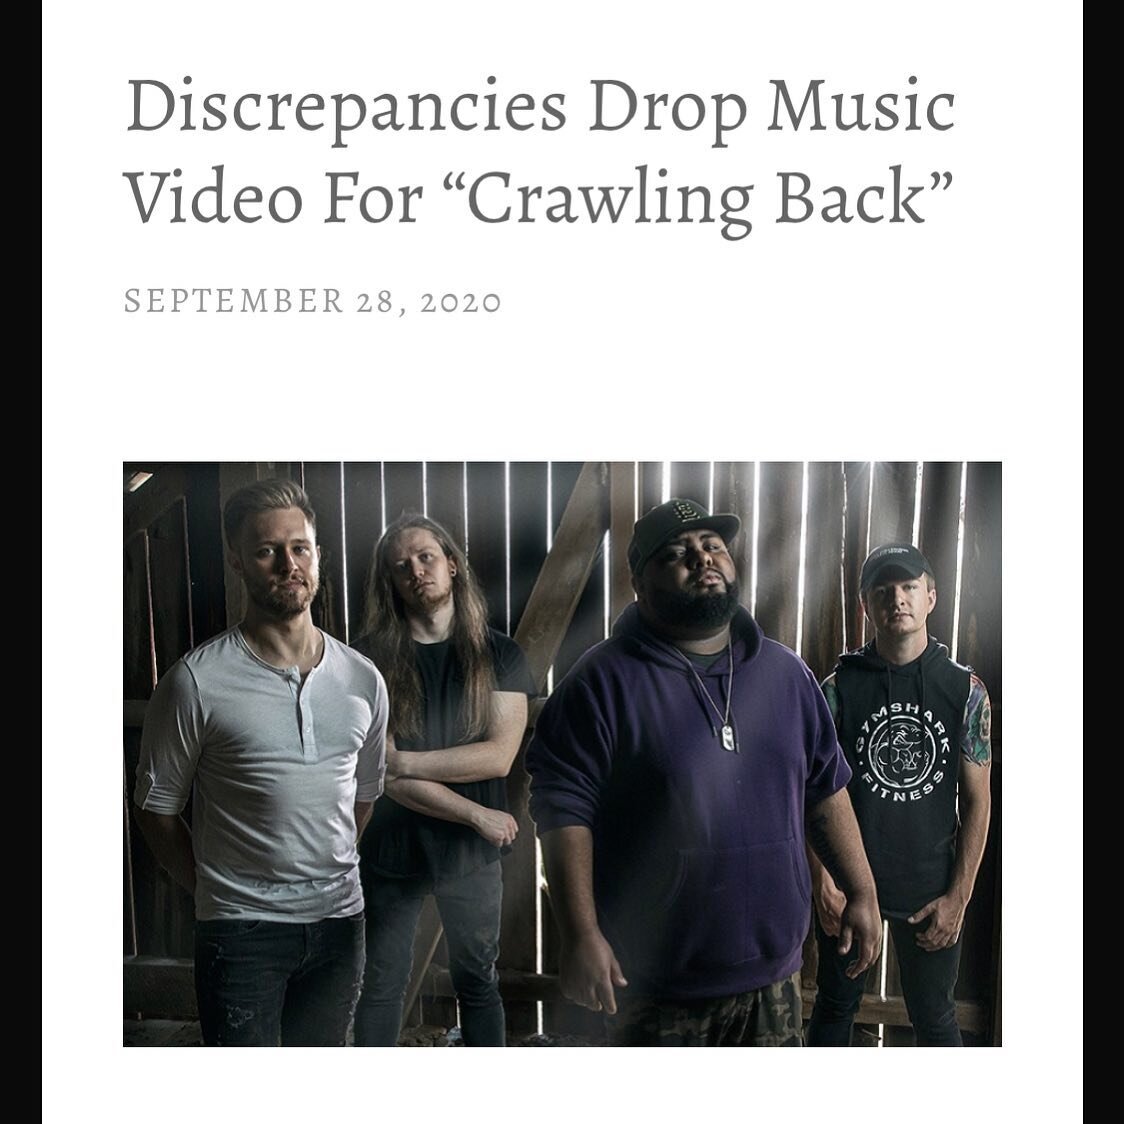 &bull; 
Big thanks to @noisebarrage1 for the write up on Crawling Back 🔥

𝘼𝘿𝘿 &ldquo;𝘾𝙍𝘼𝙒𝙇𝙄𝙉𝙂 𝘽𝘼𝘾𝙆&rdquo; 𝙏𝙊 𝙔𝙊𝙐𝙍 𝙋𝙇𝘼𝙔𝙇𝙄𝙎𝙏 𝙉𝙊𝙒 &amp; 𝙋𝙍𝙀-𝙊𝙍𝘿𝙀𝙍 𝙏𝙃𝙀 𝙉𝙀𝙒 𝘼𝙇𝘽𝙐𝙈!! 𝘓𝘐𝘕𝘒 𝘐𝘕 𝘉𝘐𝘖

#CRAWLINGBACK 

-